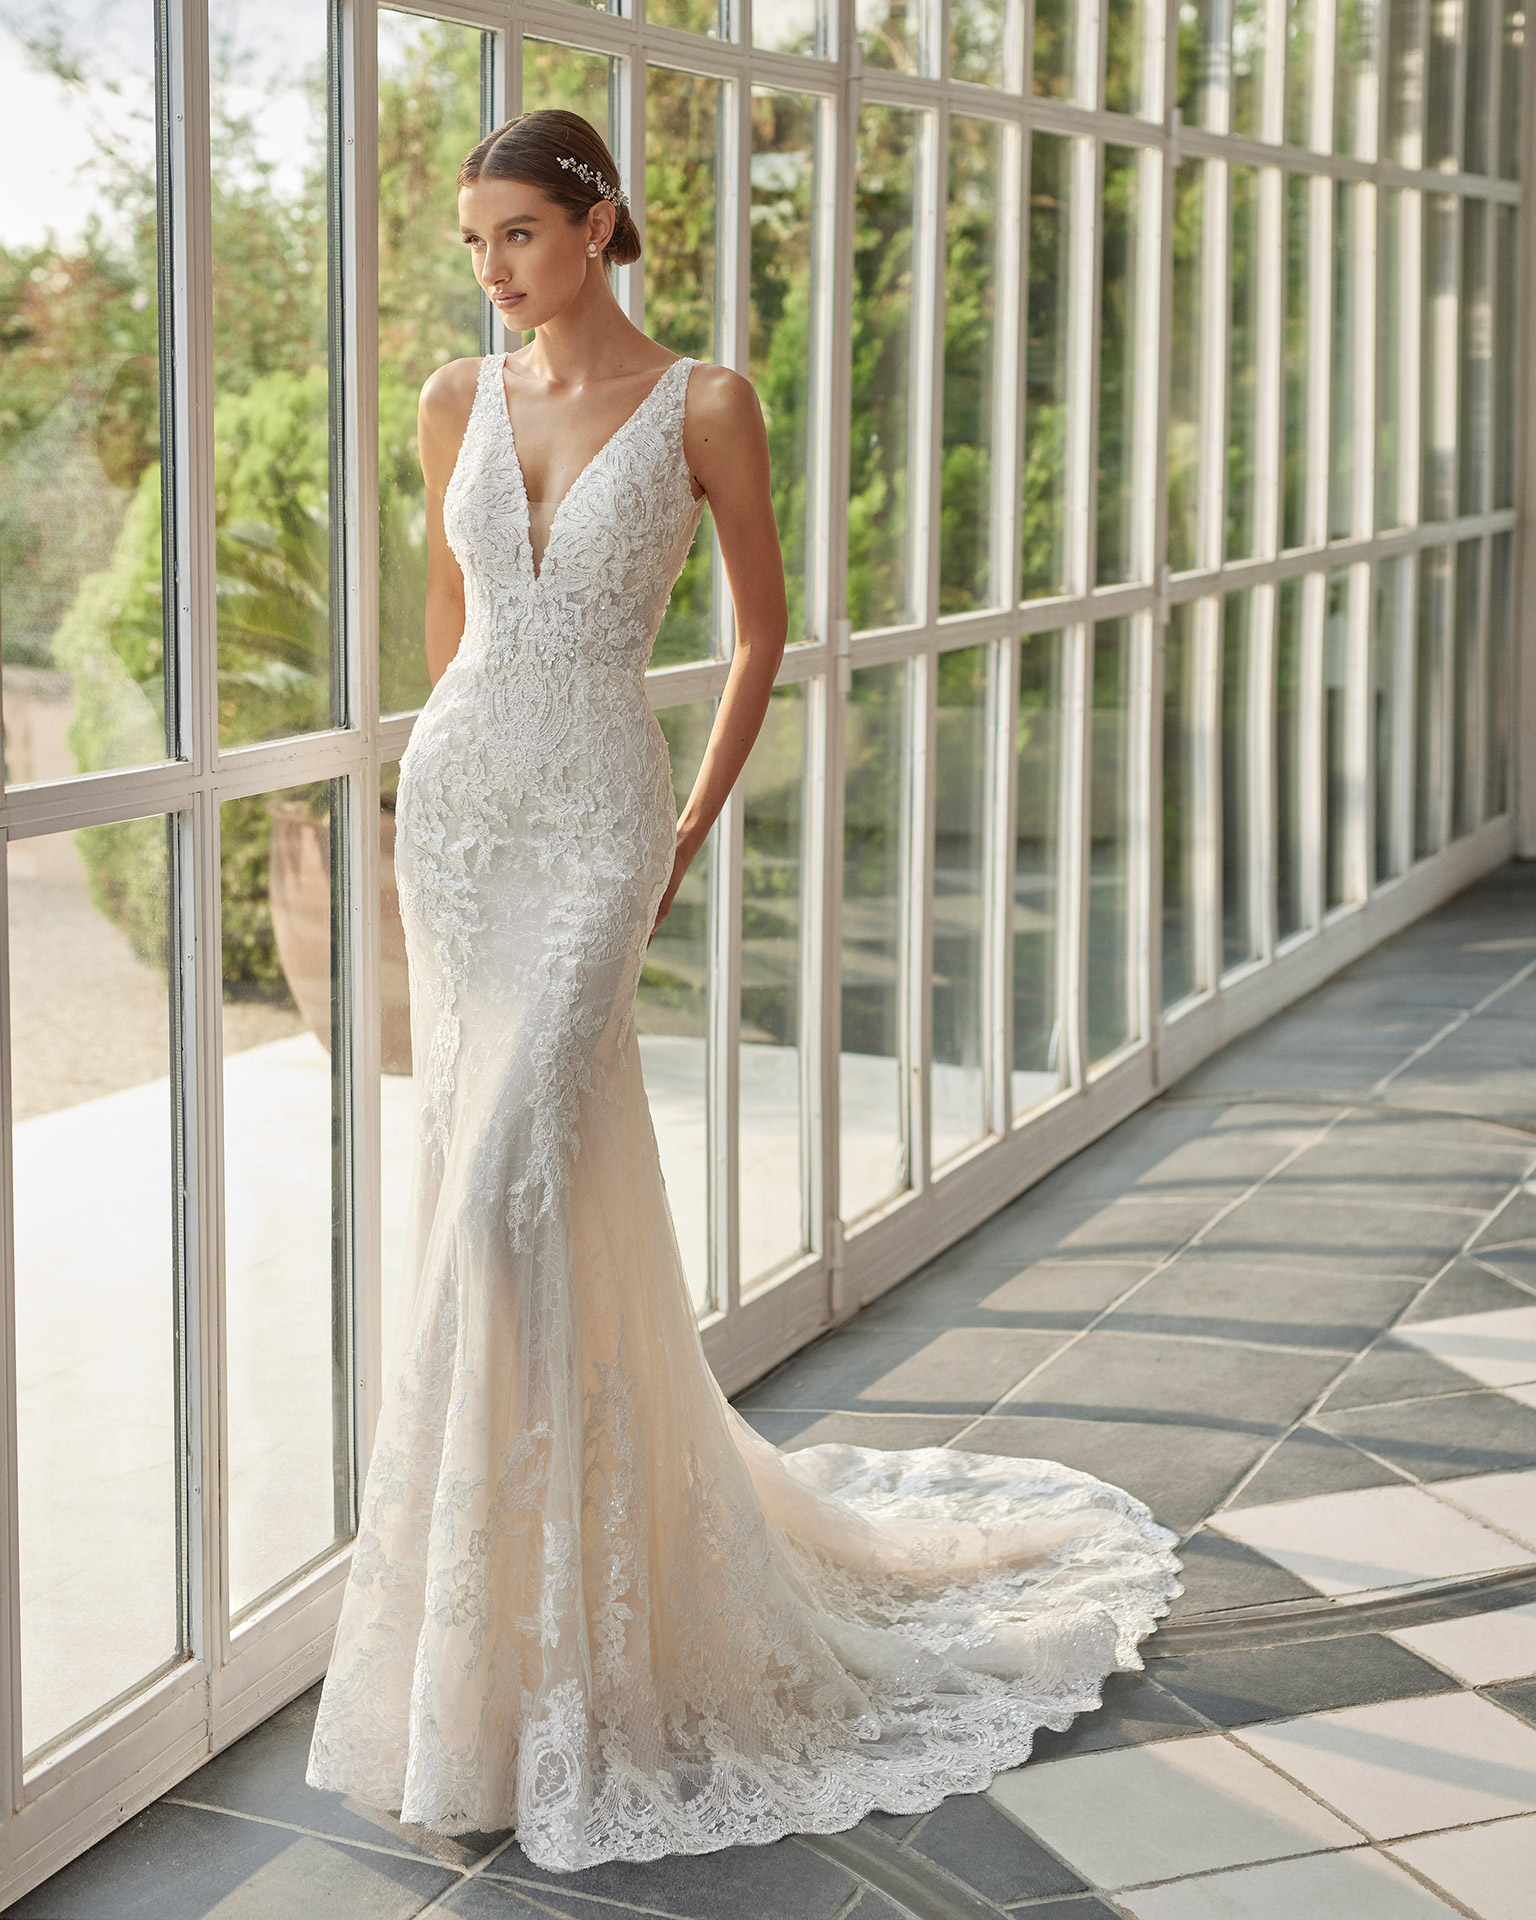 Two-piece mermaid-style wedding dress, with a voluminous overskirt; with a deep-plunge neckline, a V-back, and straps. Exclusive Luna Studio outfit made of tulle and lace with beadwork. LUNA_NOVIAS.